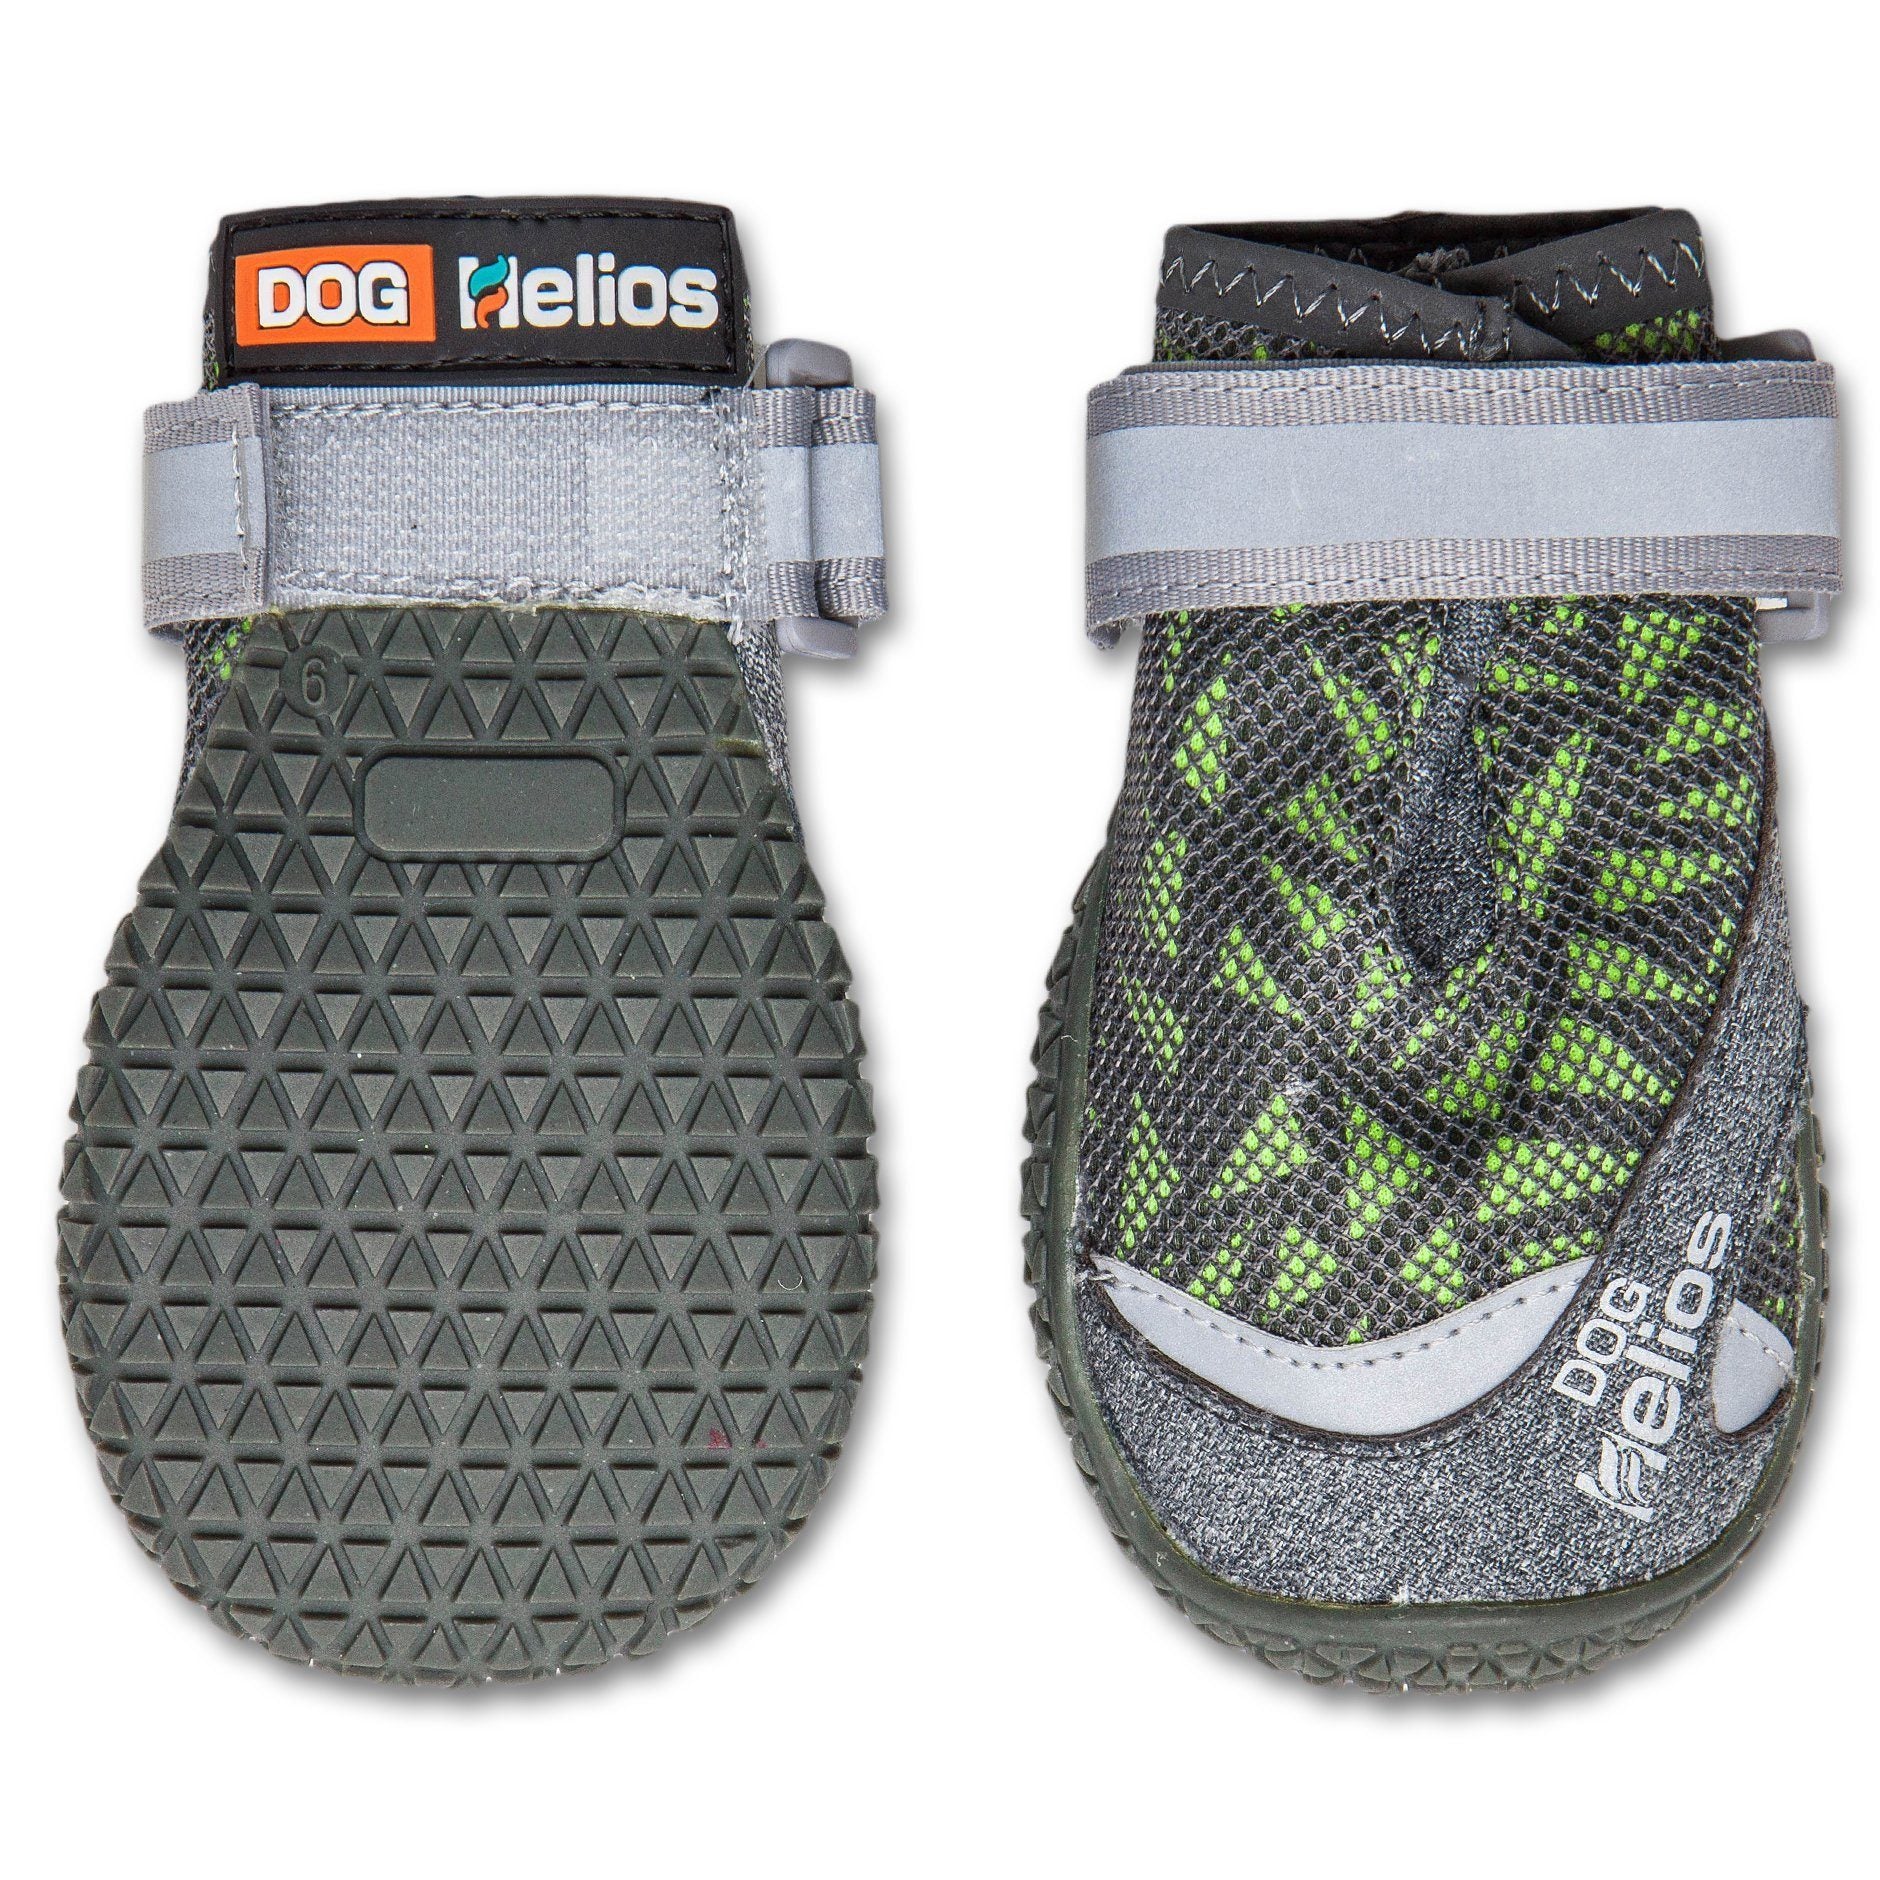 Dog Helios 'Surface' Premium Grip Performance Dog Shoes - Set Of 4 X-Small Green